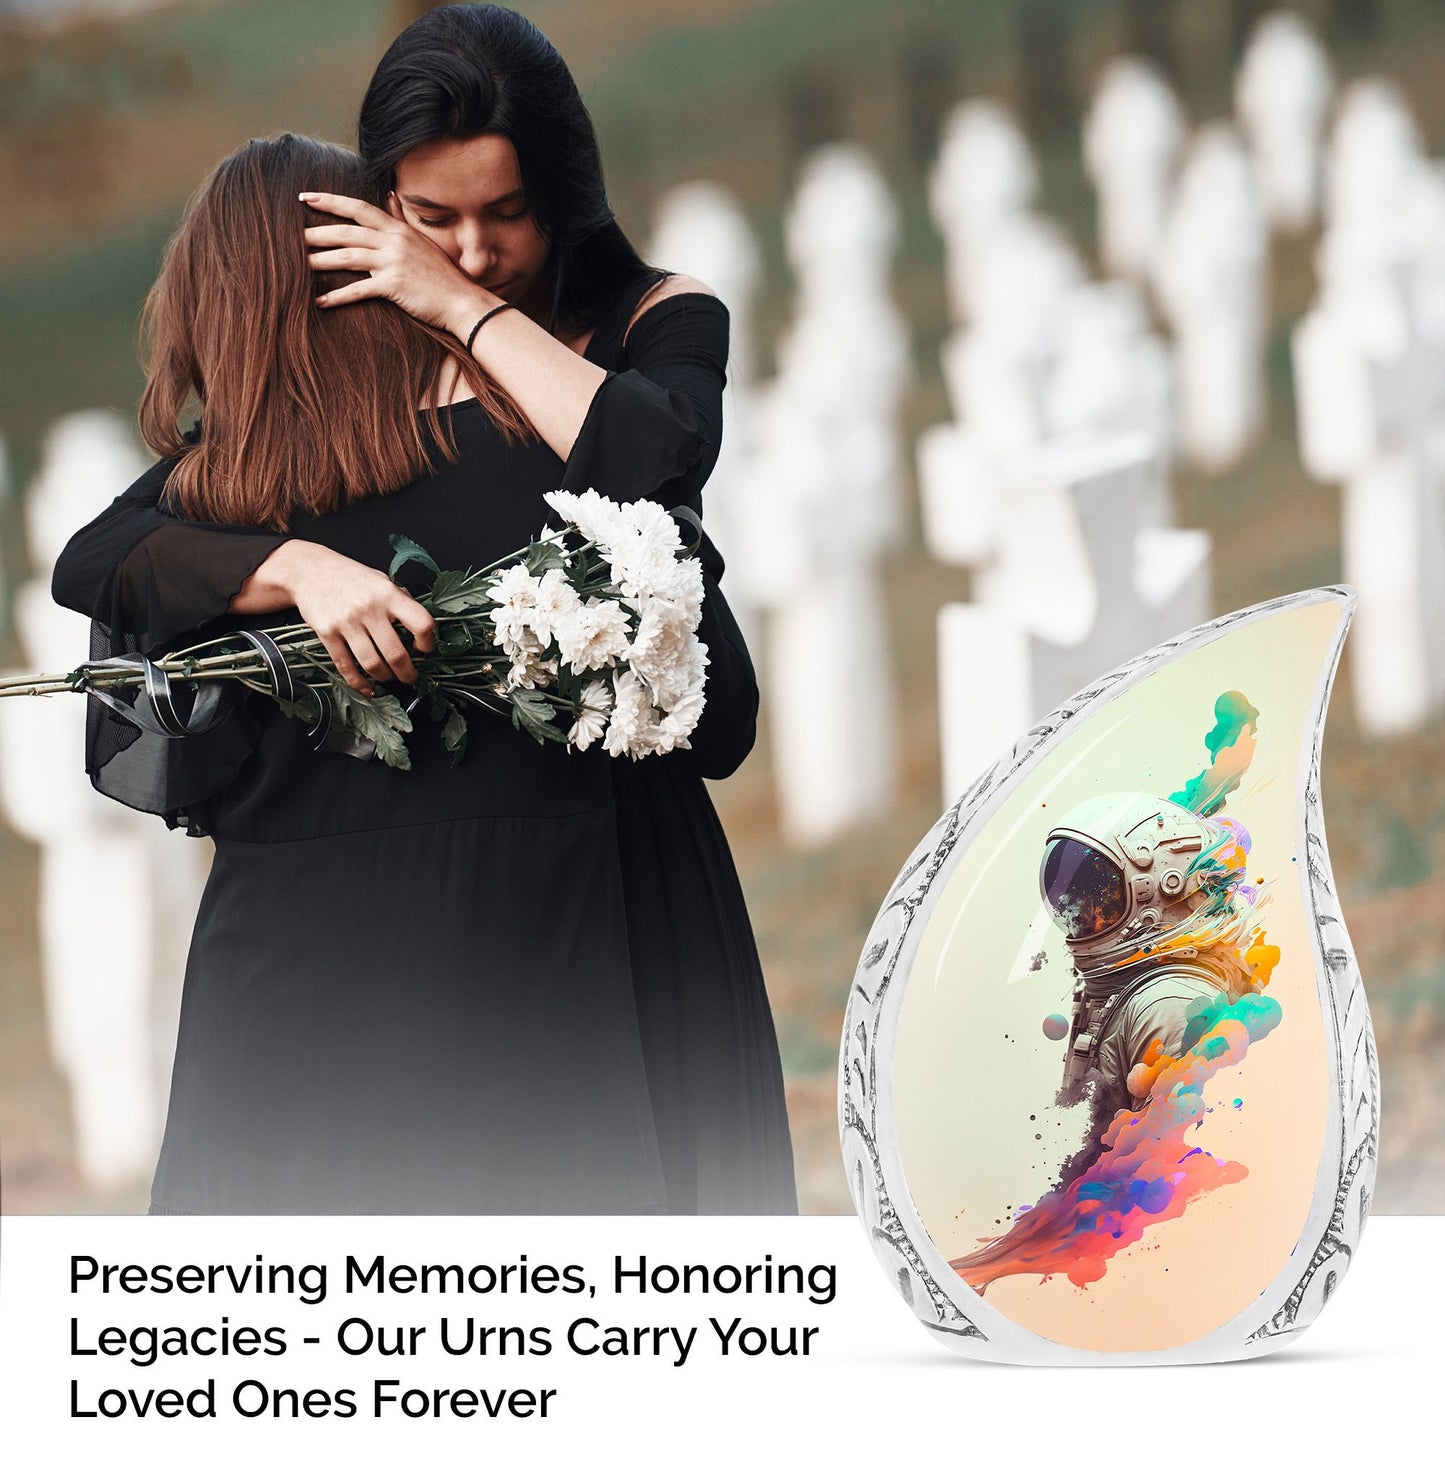 Large urn featuring an astronaut amidst space clouds, suitable for human ashes burial. Ideal cremation urn for adult man.